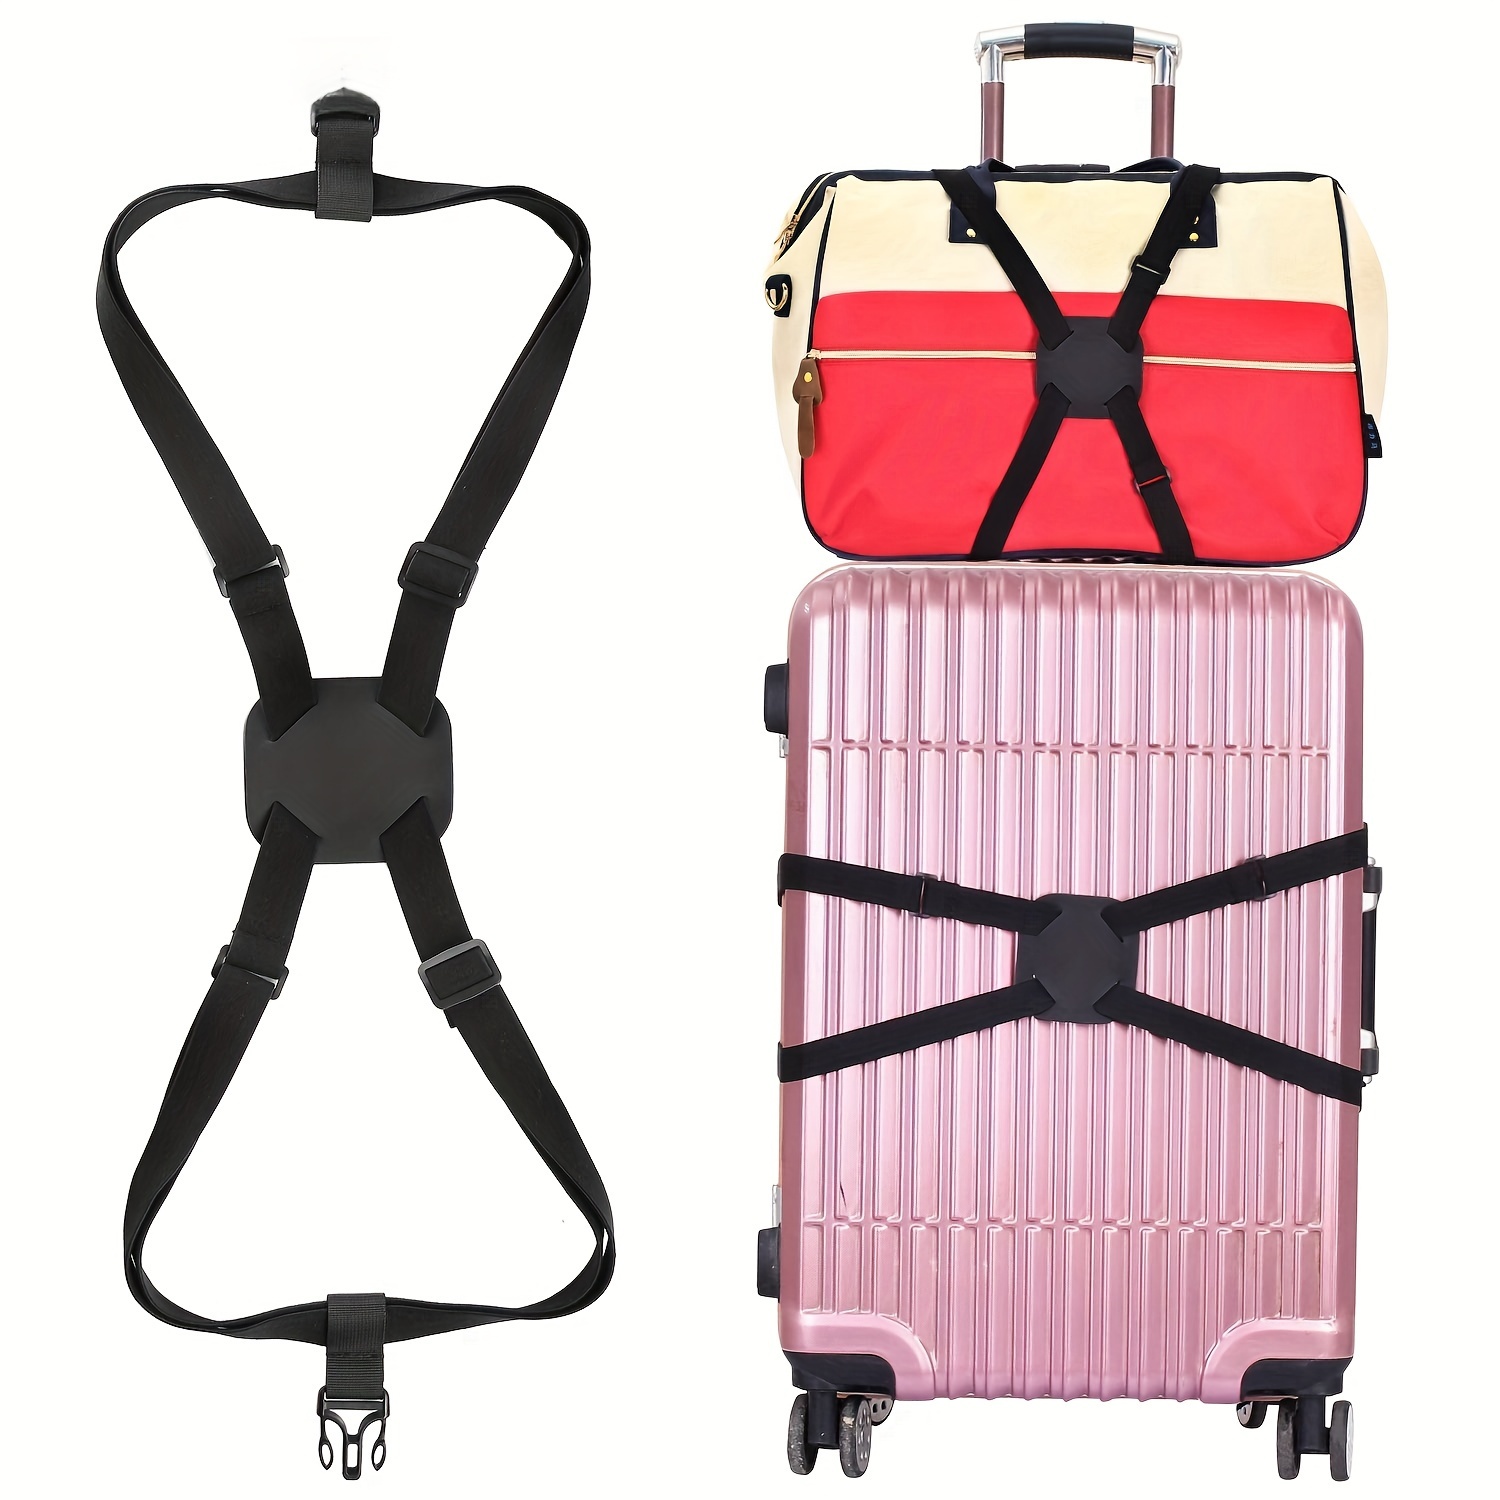 

1pc Adjustable Luggage Strap, Suitcase Packing Belt, Easy Travel Elastic Strap Travel Accessories For Suitcase